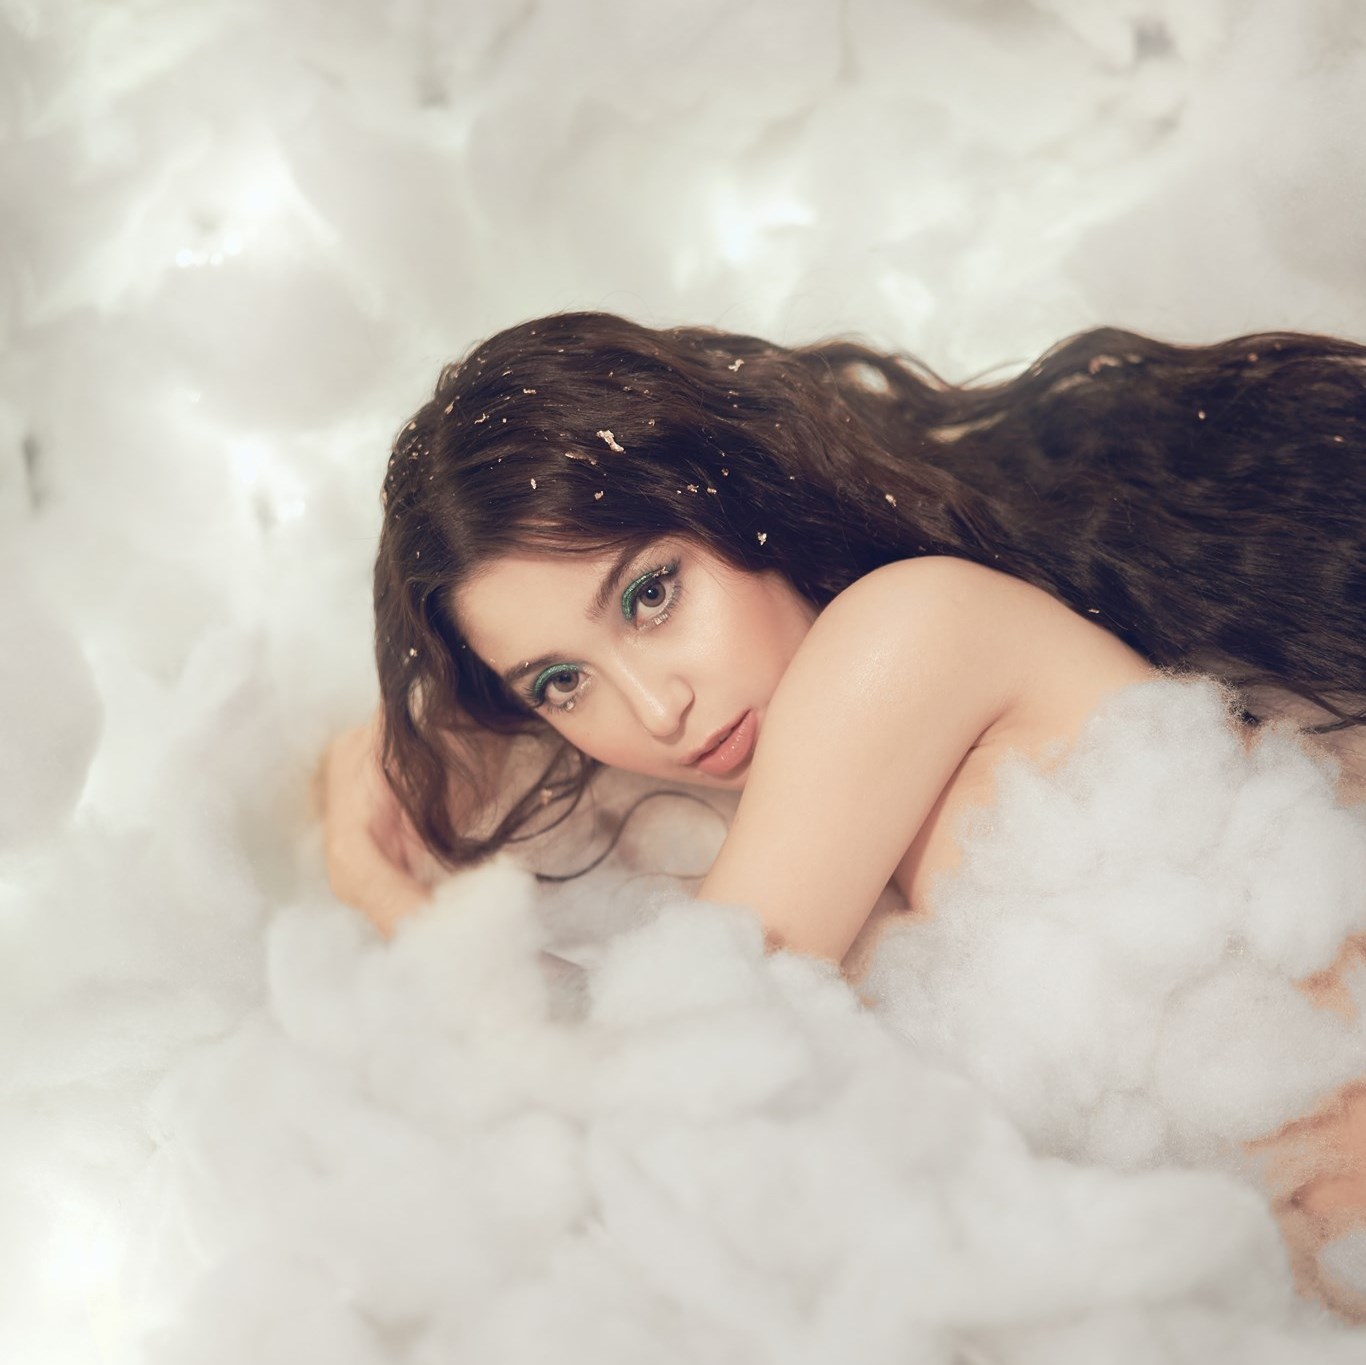 Donnalyn Bartolome’s New Single Is Called ‘Social Media Goddess’ And It’s True!